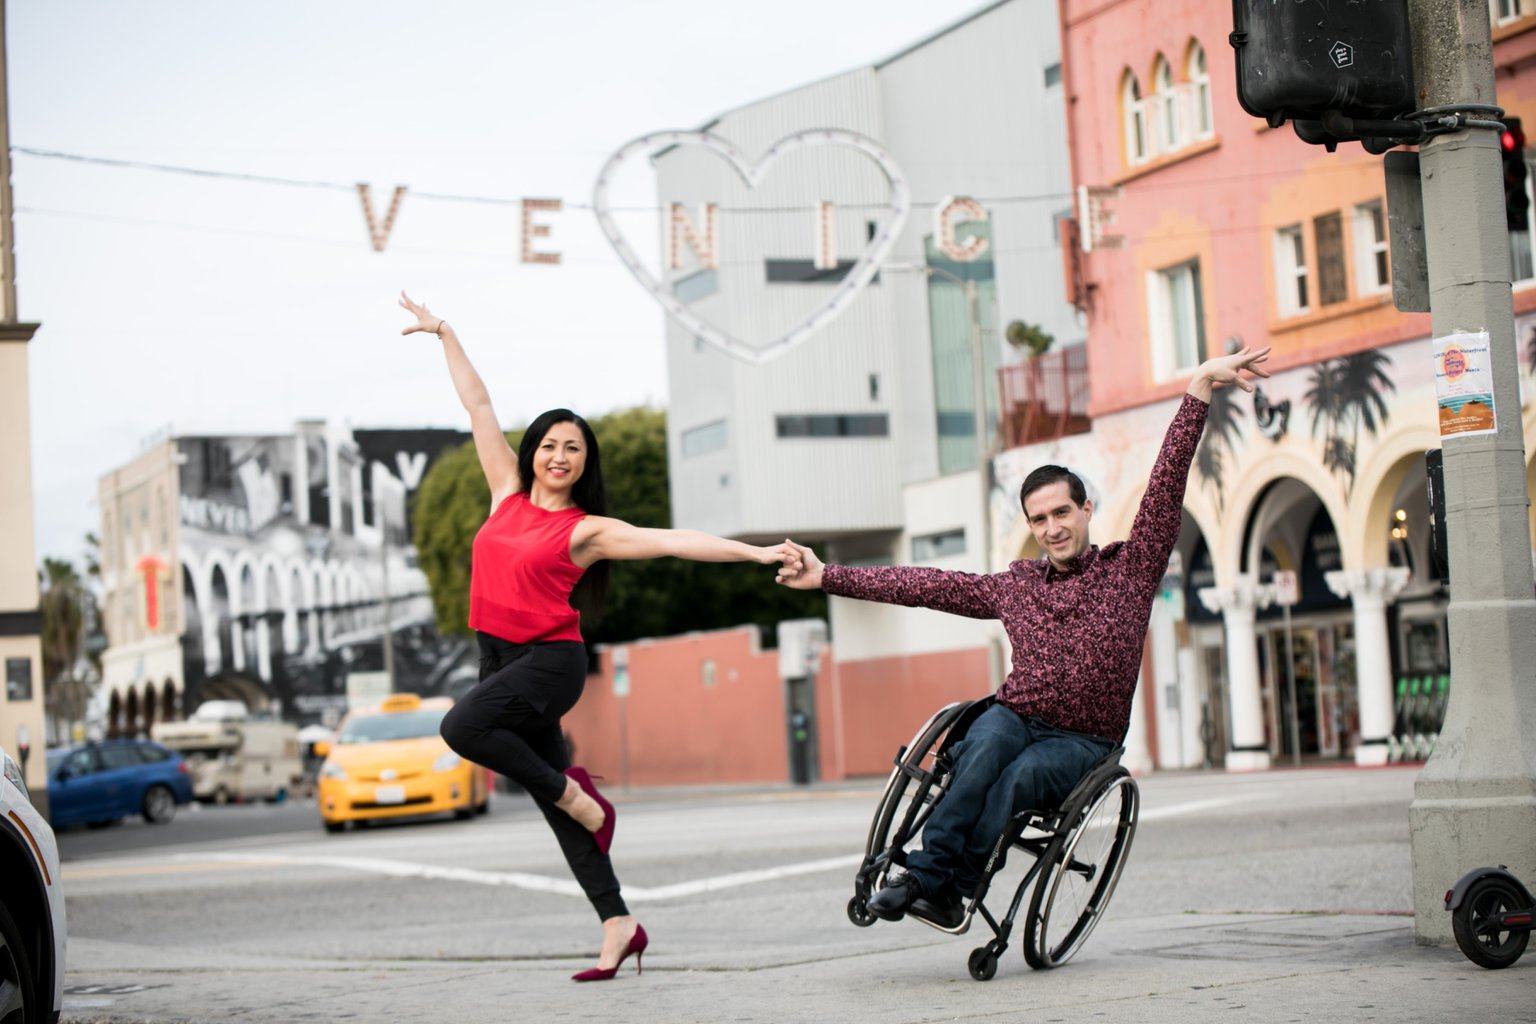 Marisa Hamamoto founded a dance company for anyone, disabled or able-bodied, six years ago. She is pictured with Piotr Iwanicki, a member of the company, Infinite Flow. Photo: Infinite Flow